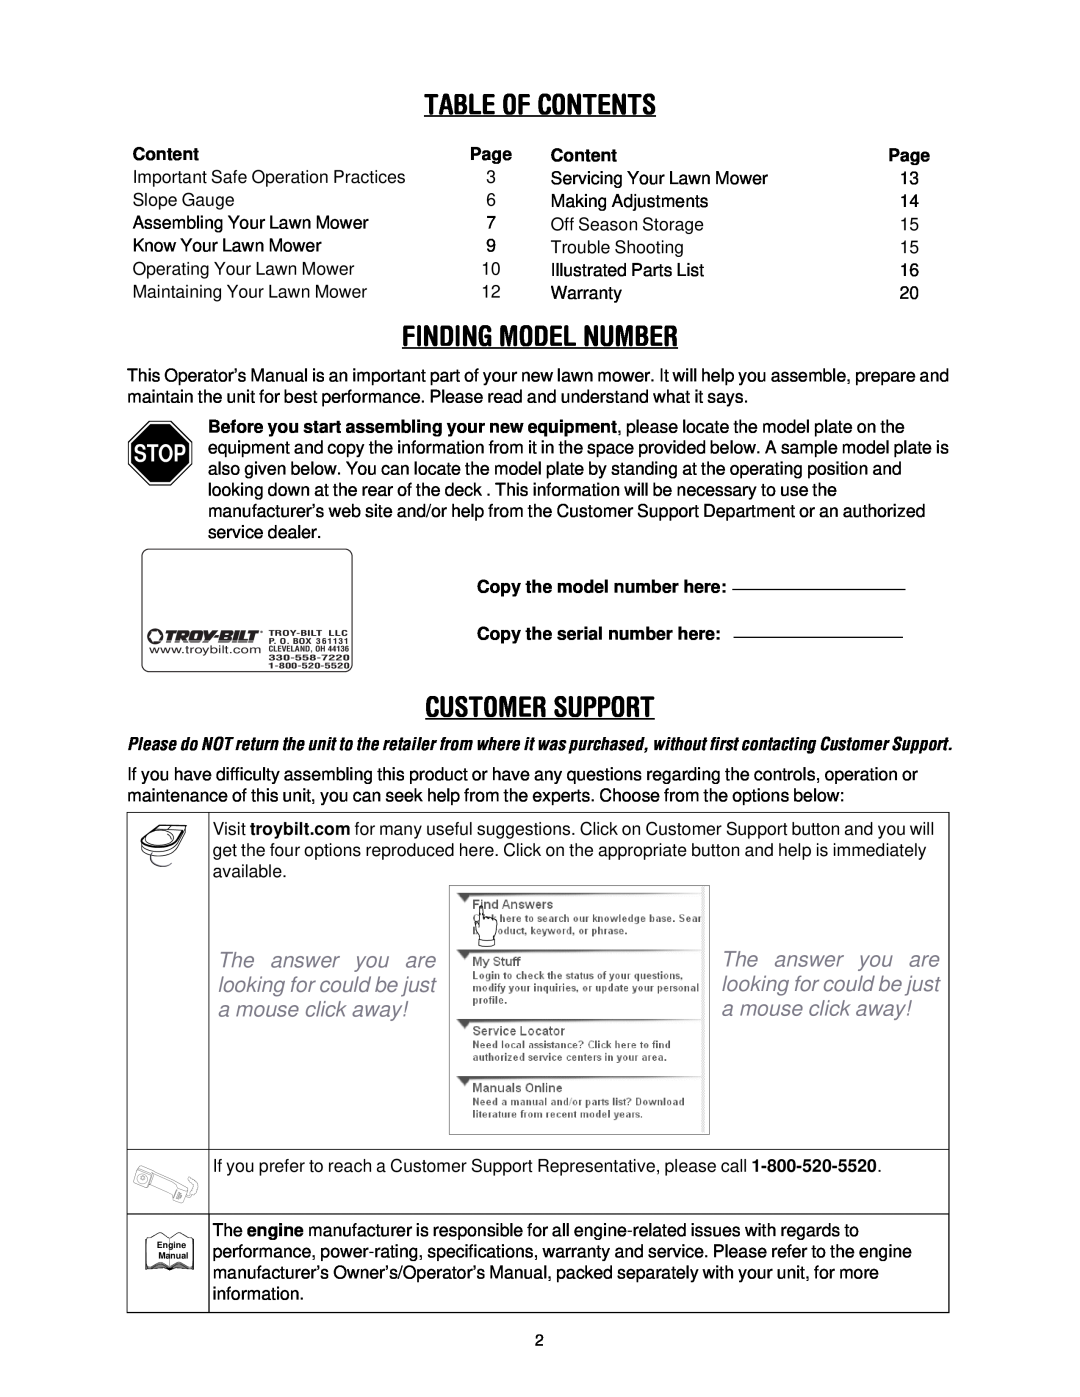 Troy-Bilt 436 manual Table Of Contents, Finding Model Number, Customer Support, Page, Copy the model number here 